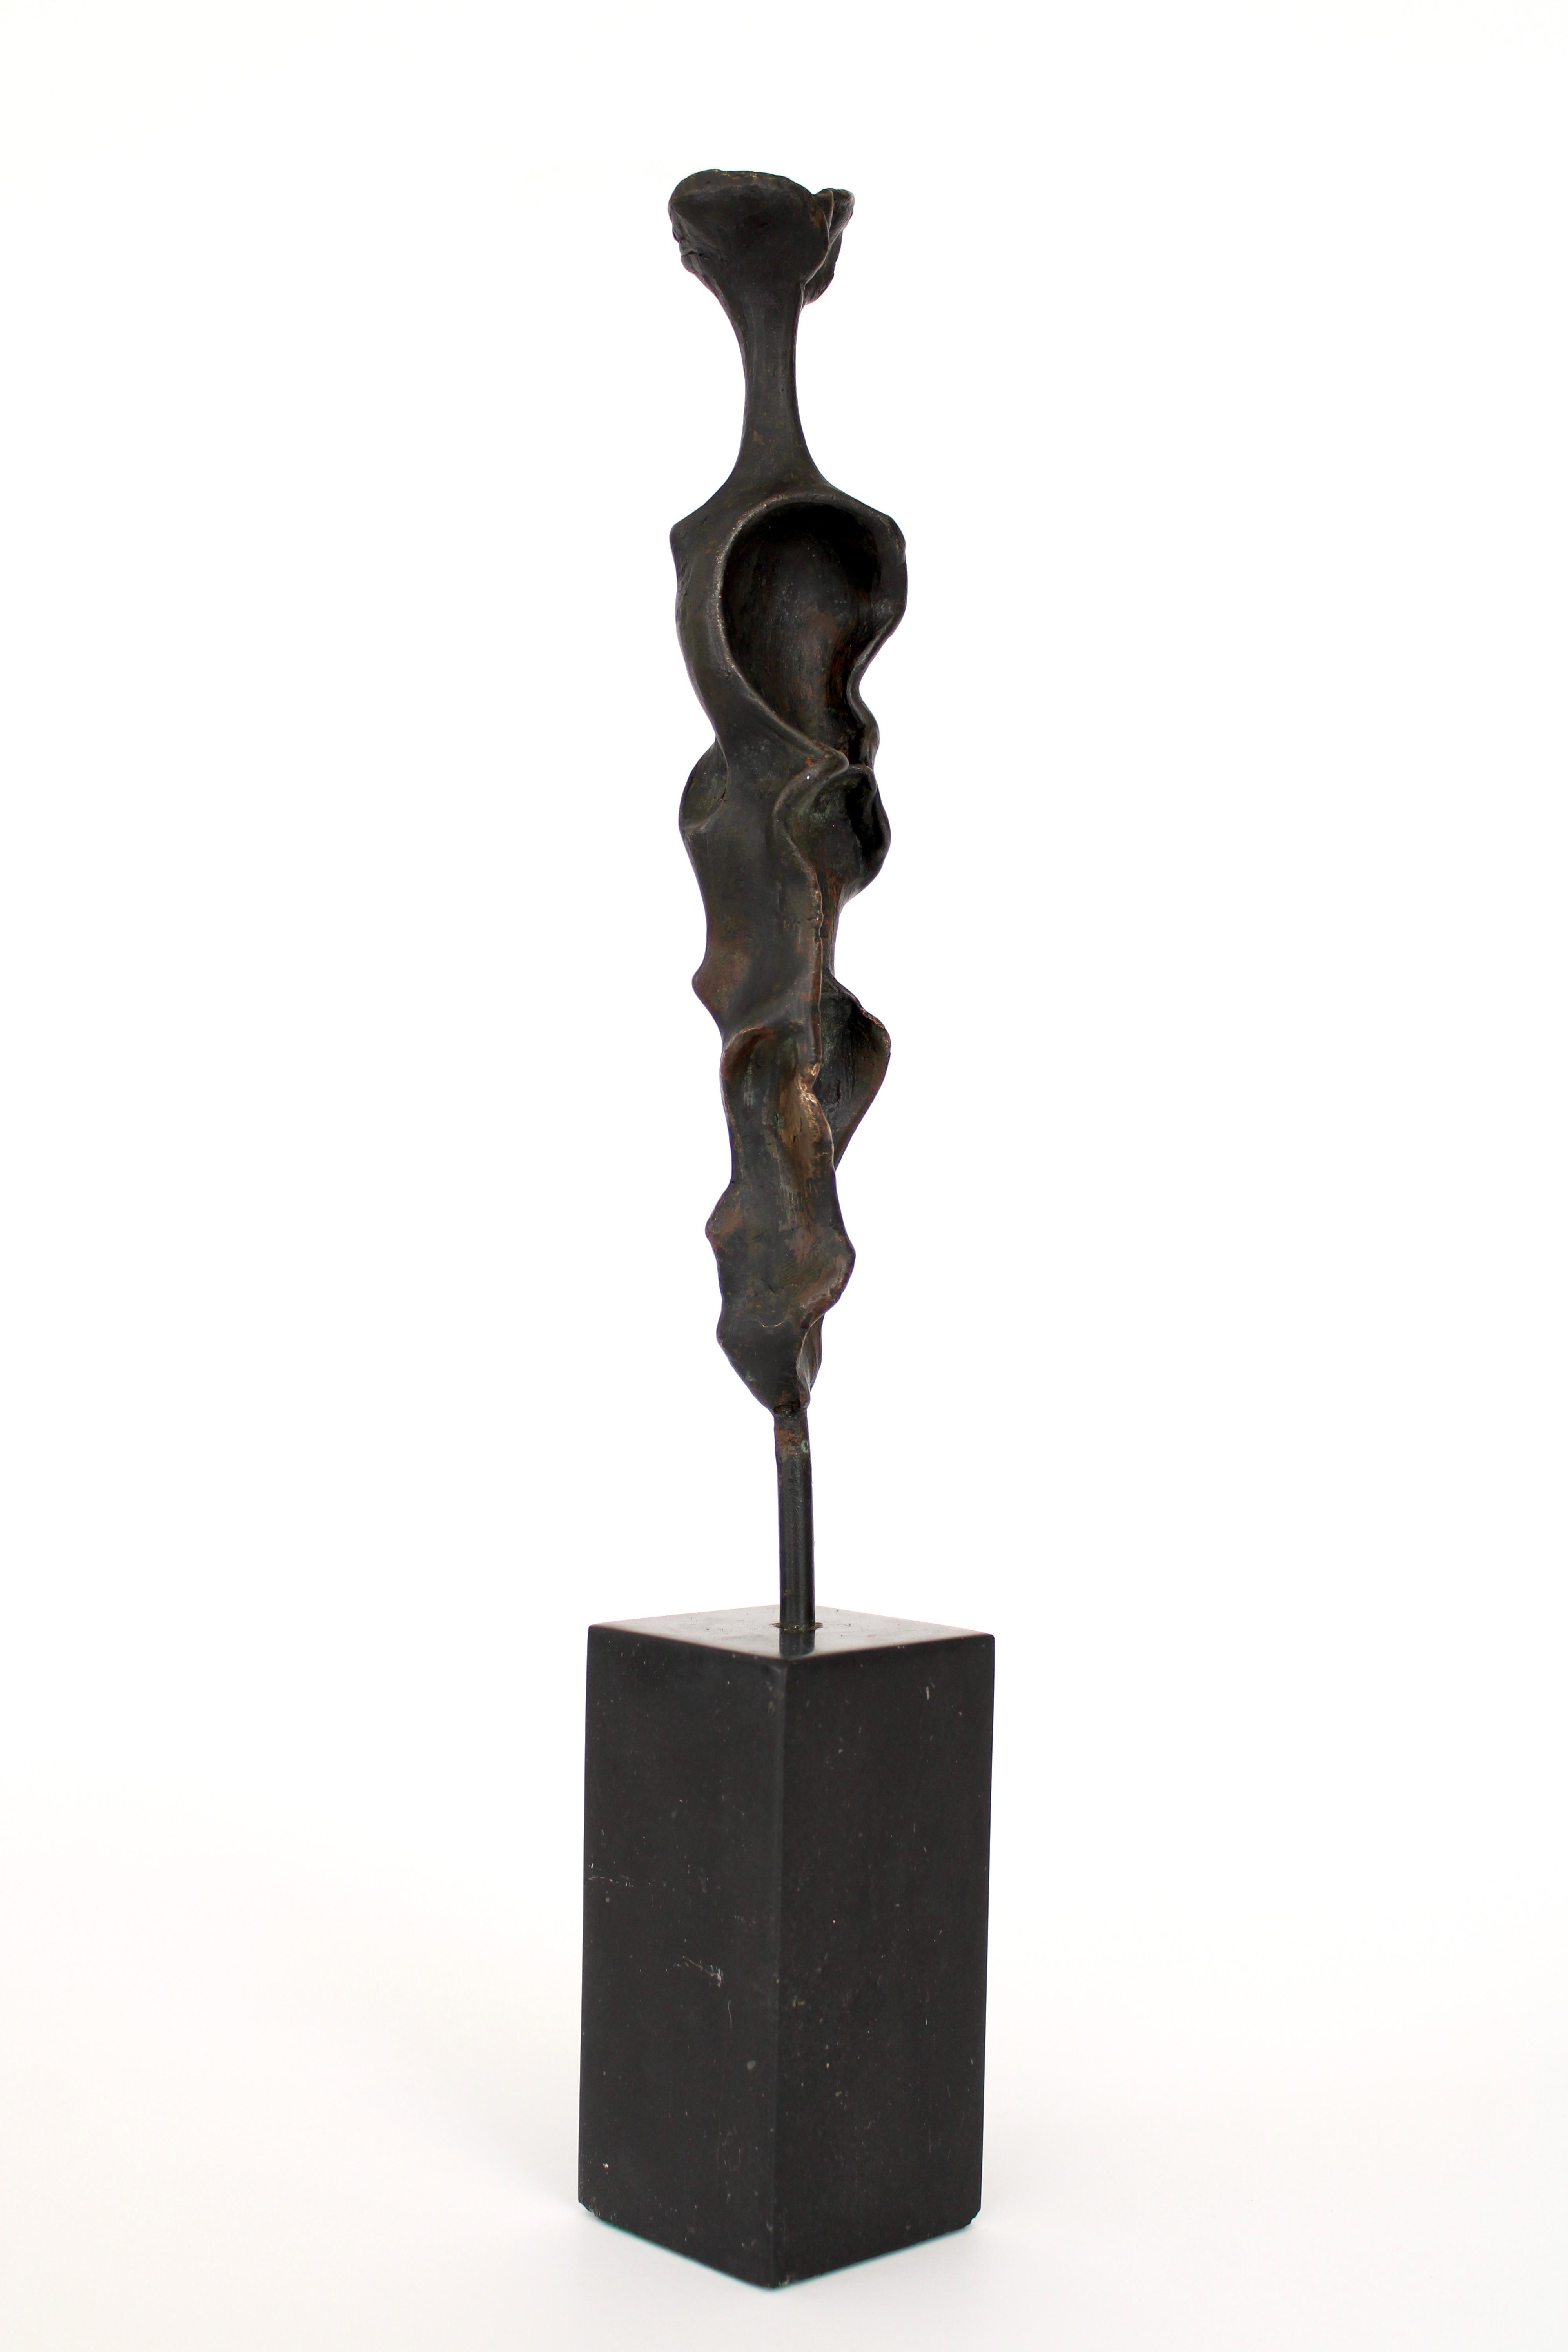 An abstract cast hand formed bronze figurative sculpture. The hand of the artist is quite evident in the molding of the figure. 
American artist but difficult to read the signature. 
On a black marble mount. 
Overall size: 2